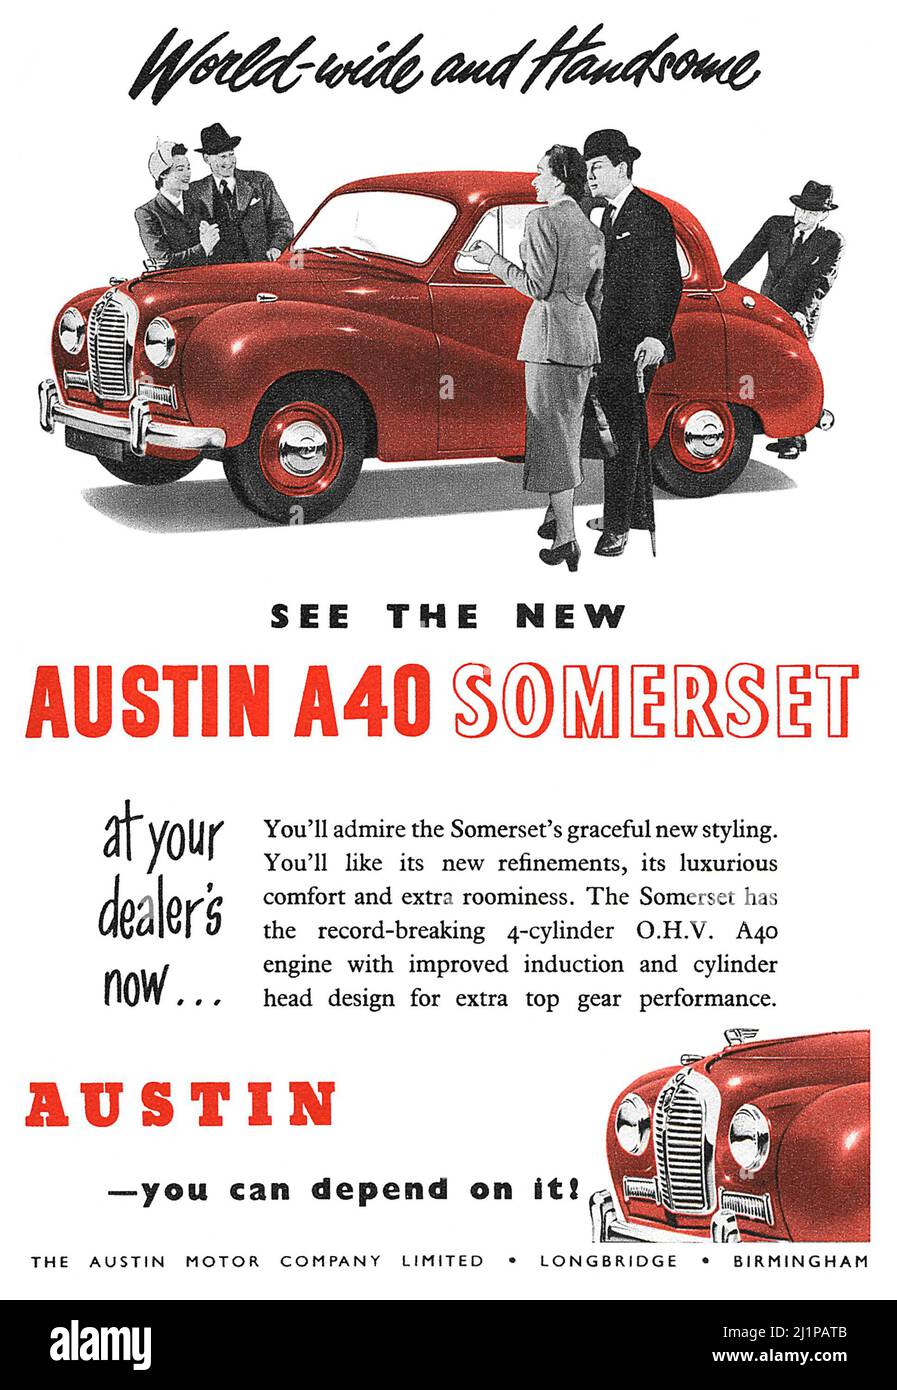 1950s British advertisement for the Austin A40 Somerset motor car. Stock Photo